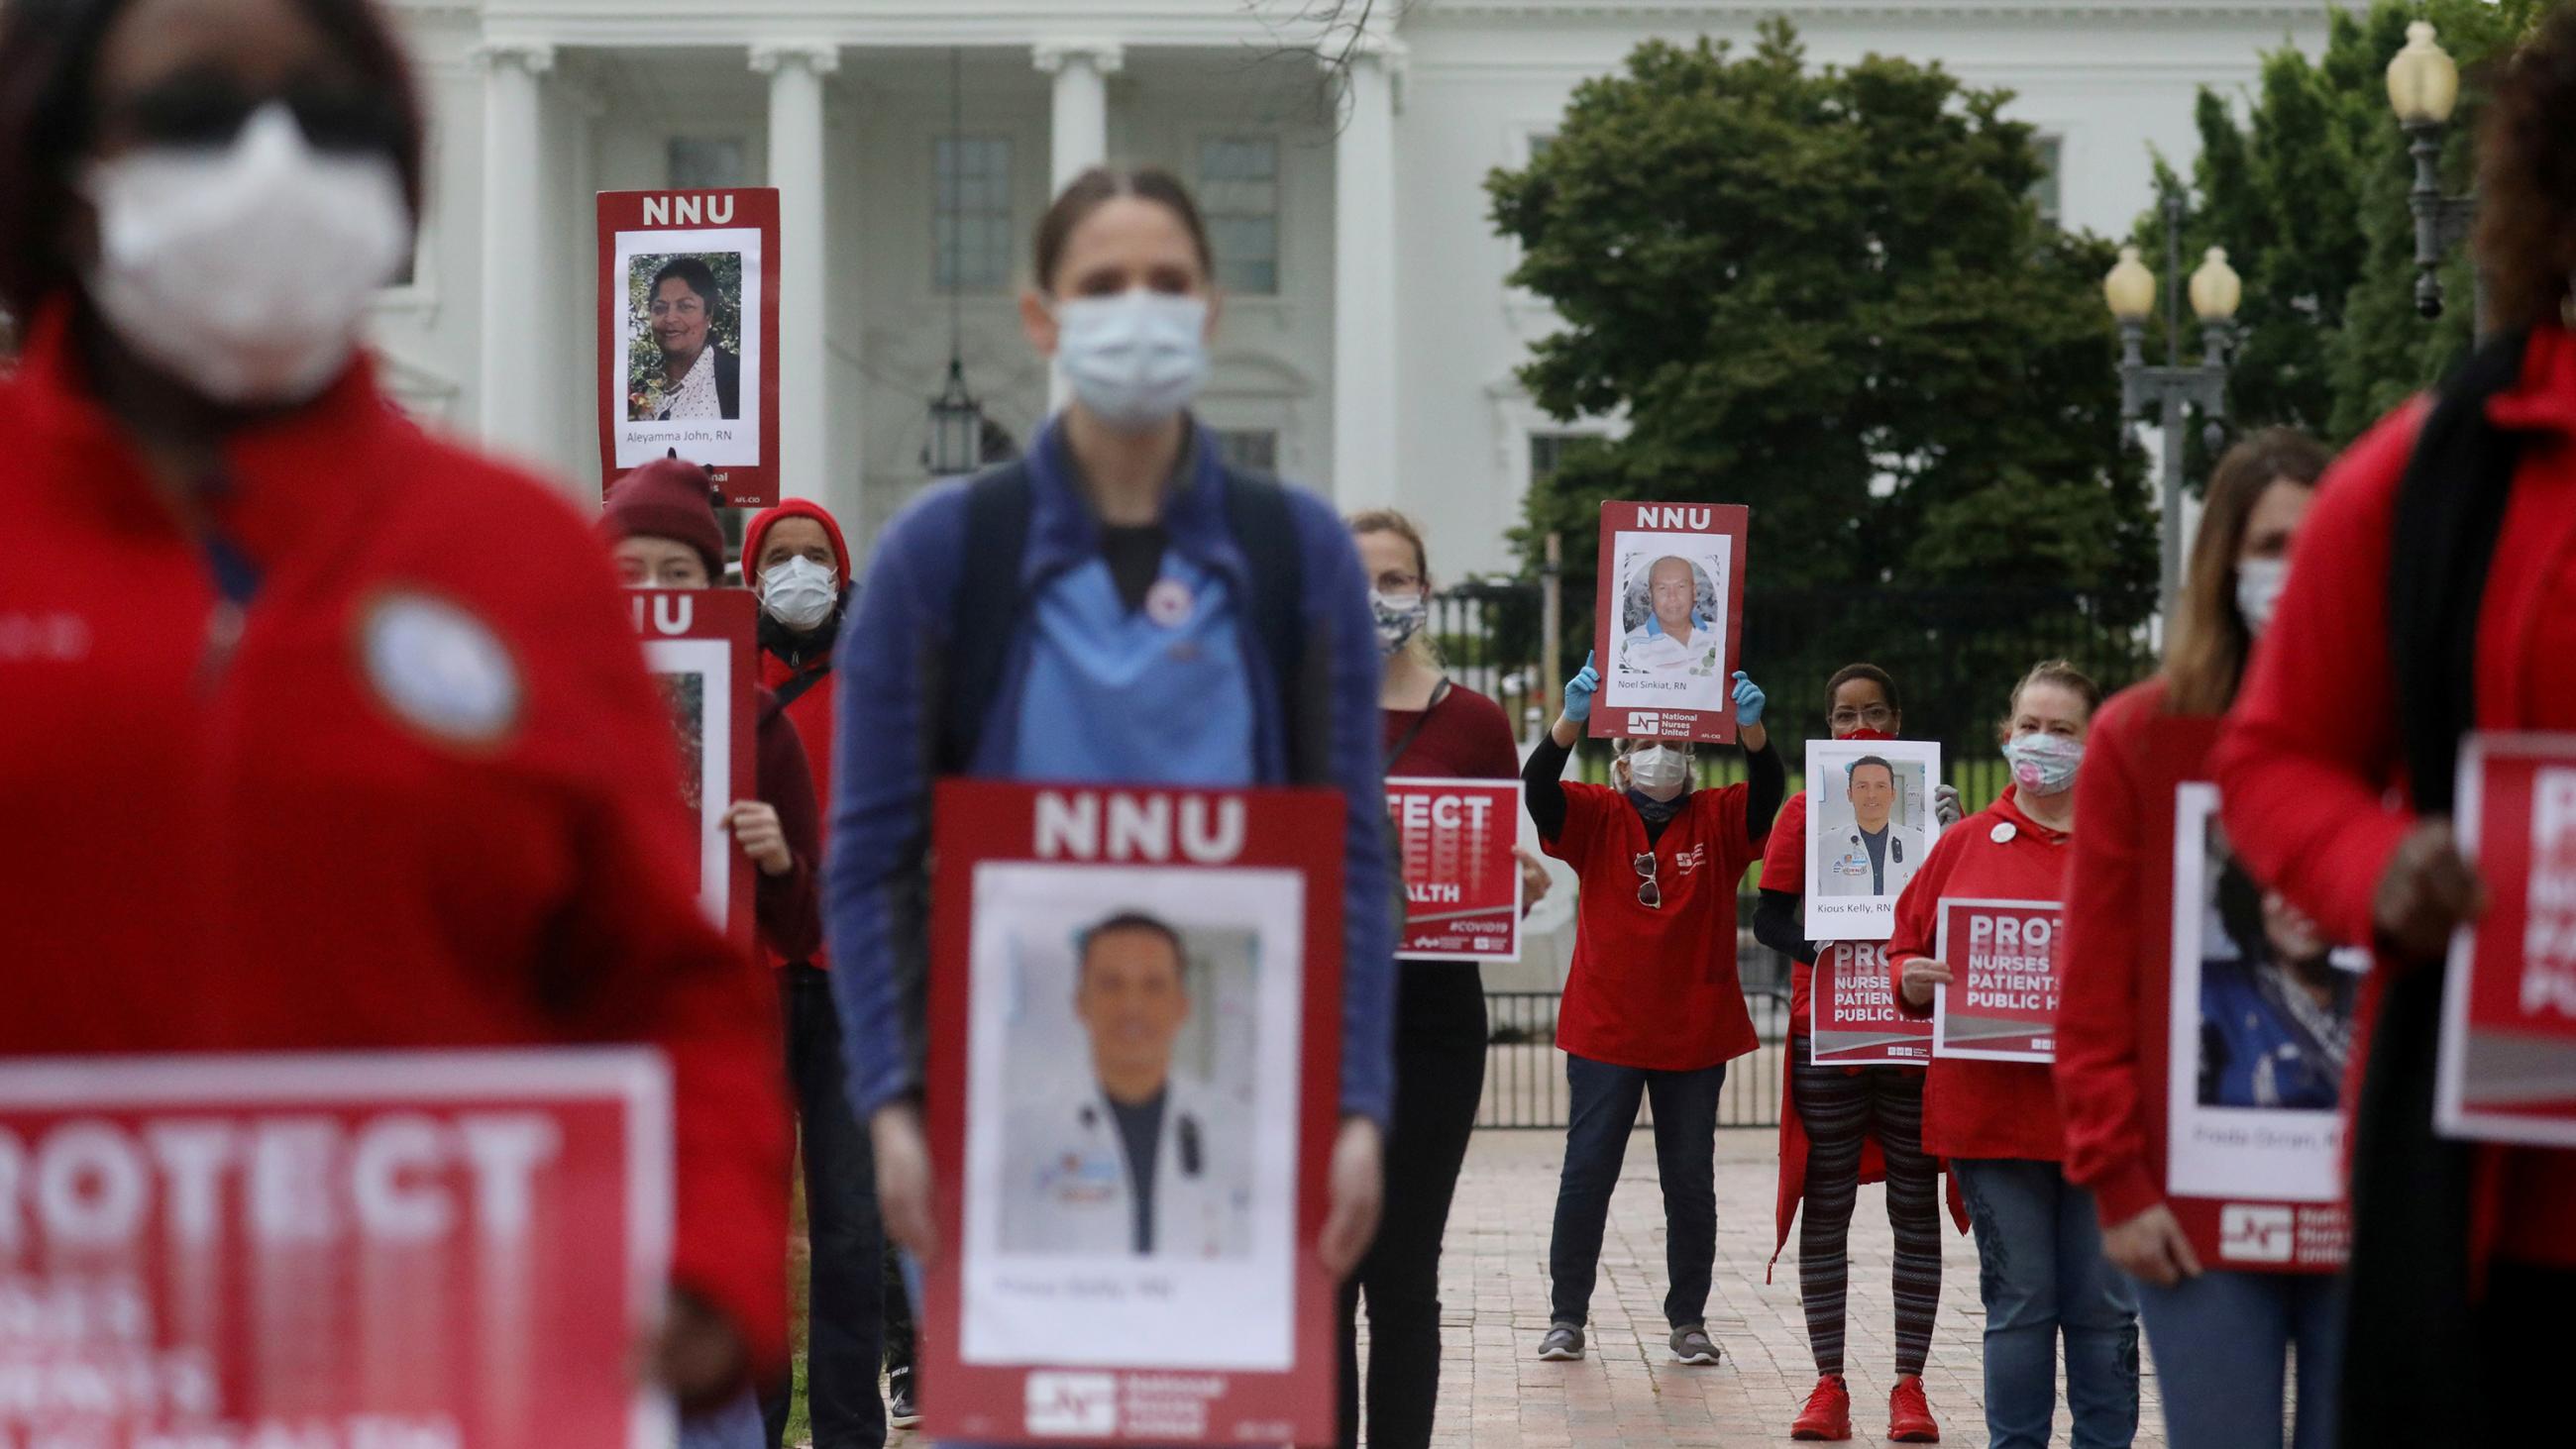 The picture shows a crods of protesting nurses holding signs. 